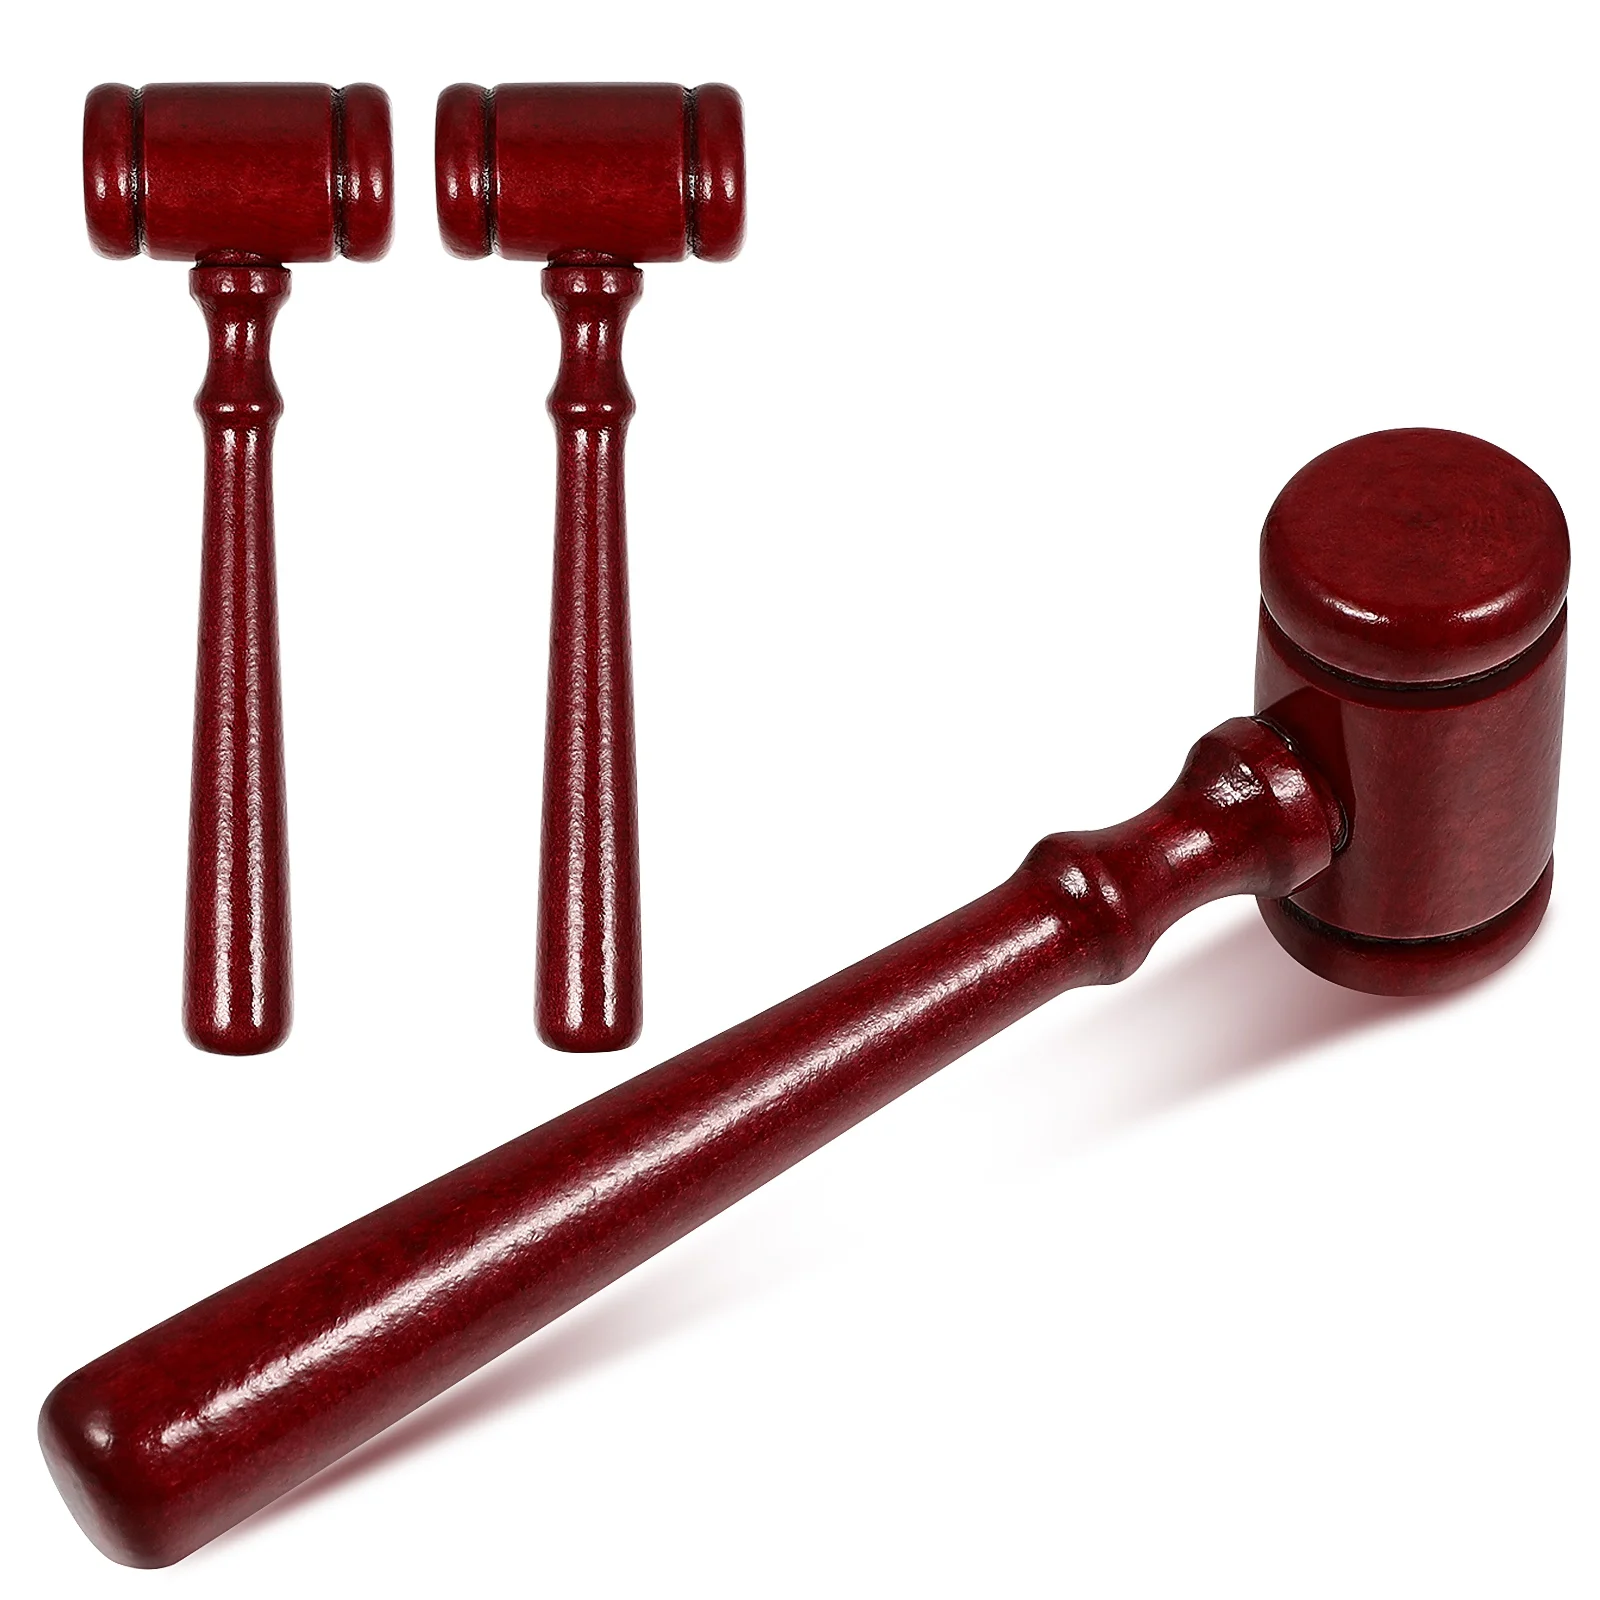 Judge Gavel Wooden Judge Hammer Handcrafted Delicate Wood Adjudgement Gavel For Auction Lawyer Sound Hand Tools